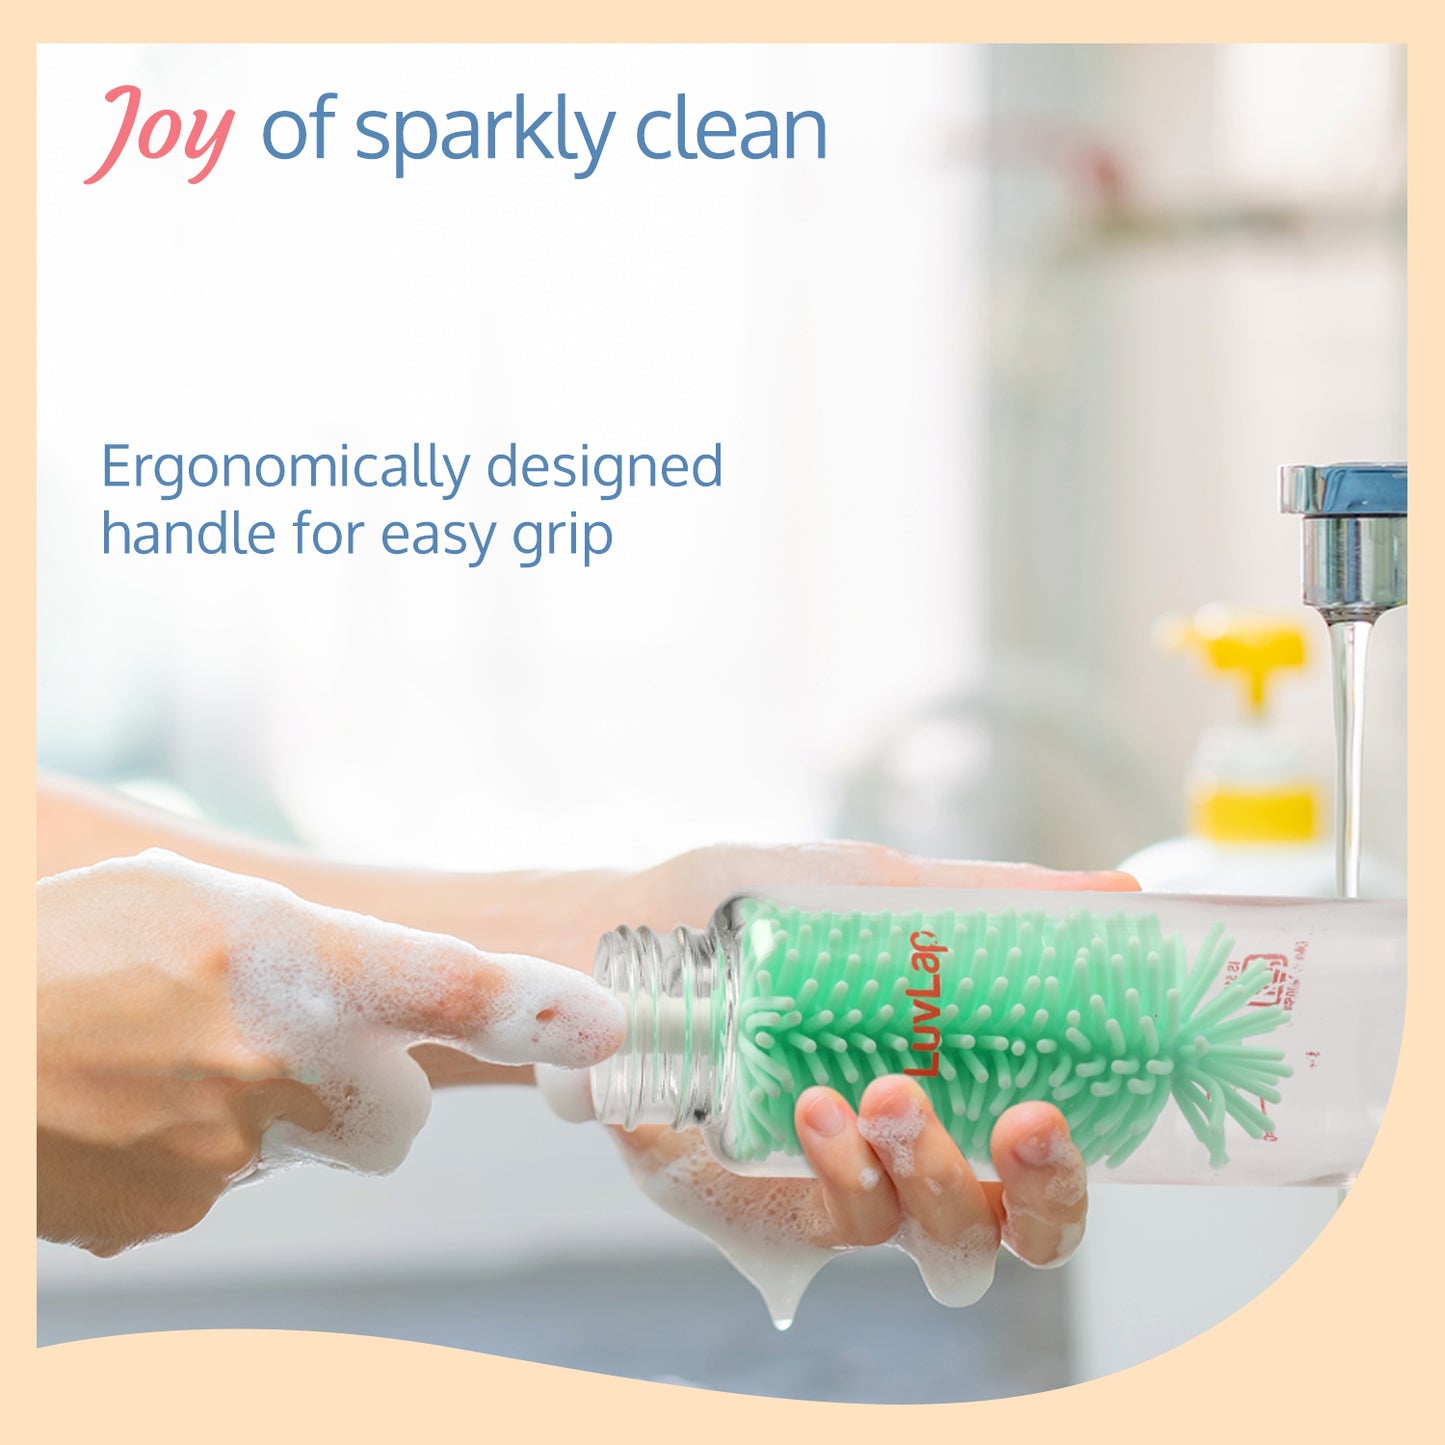 2 - in -1 Silicone Bristle bottle cleaning brush, Green